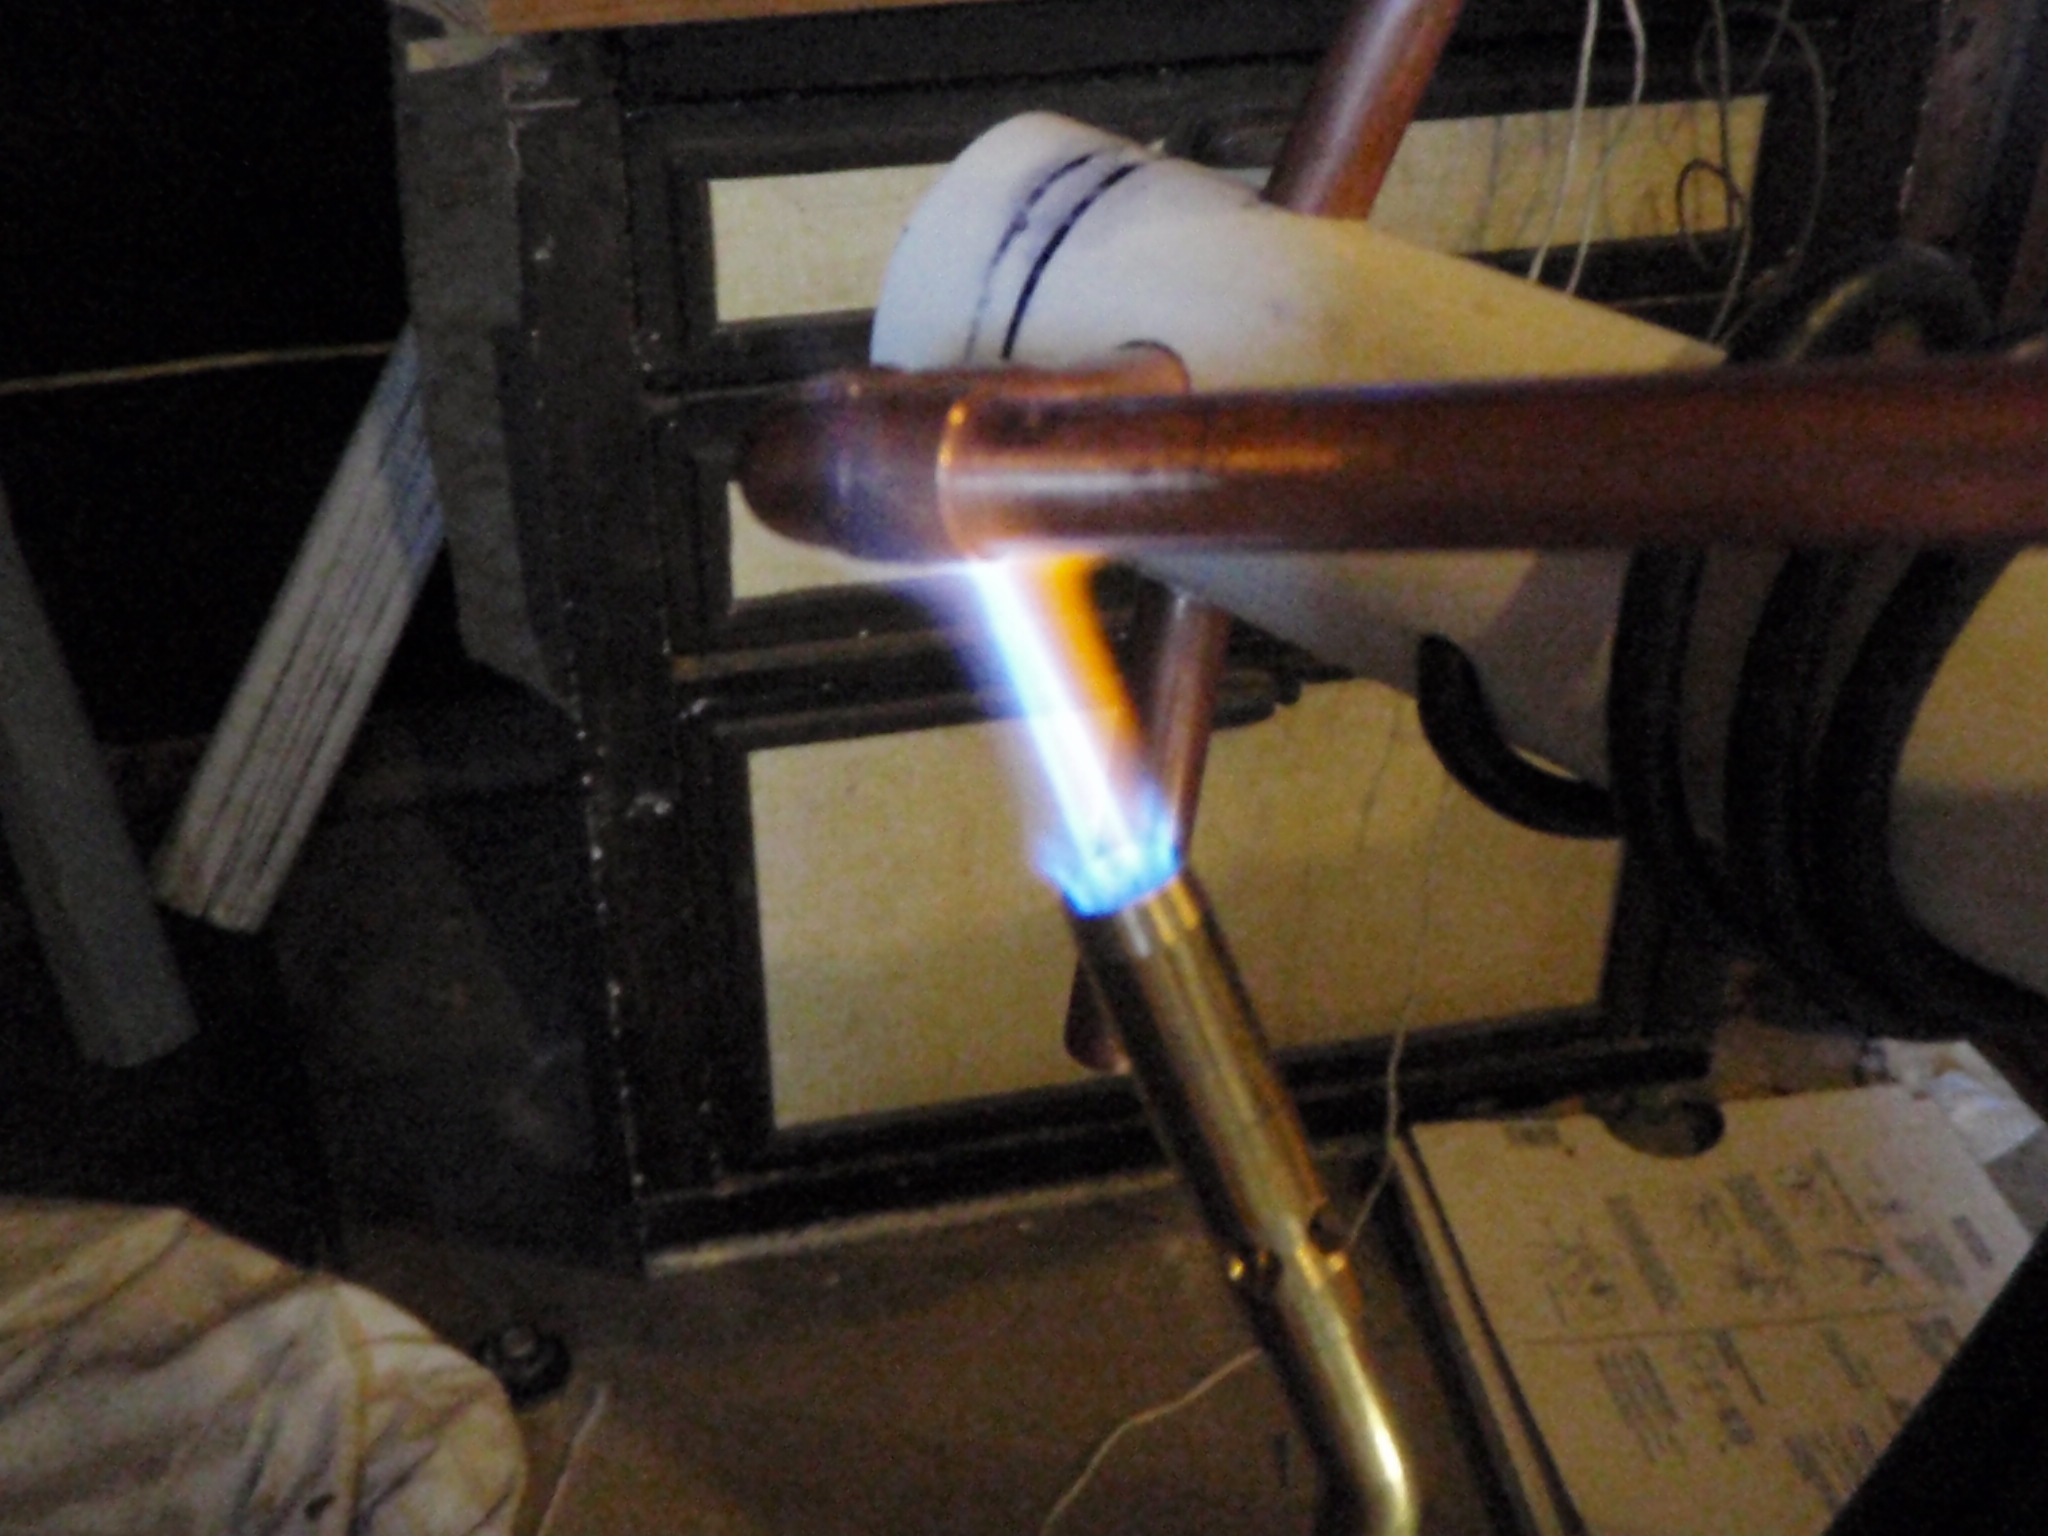 Blow torching the copper fiitings